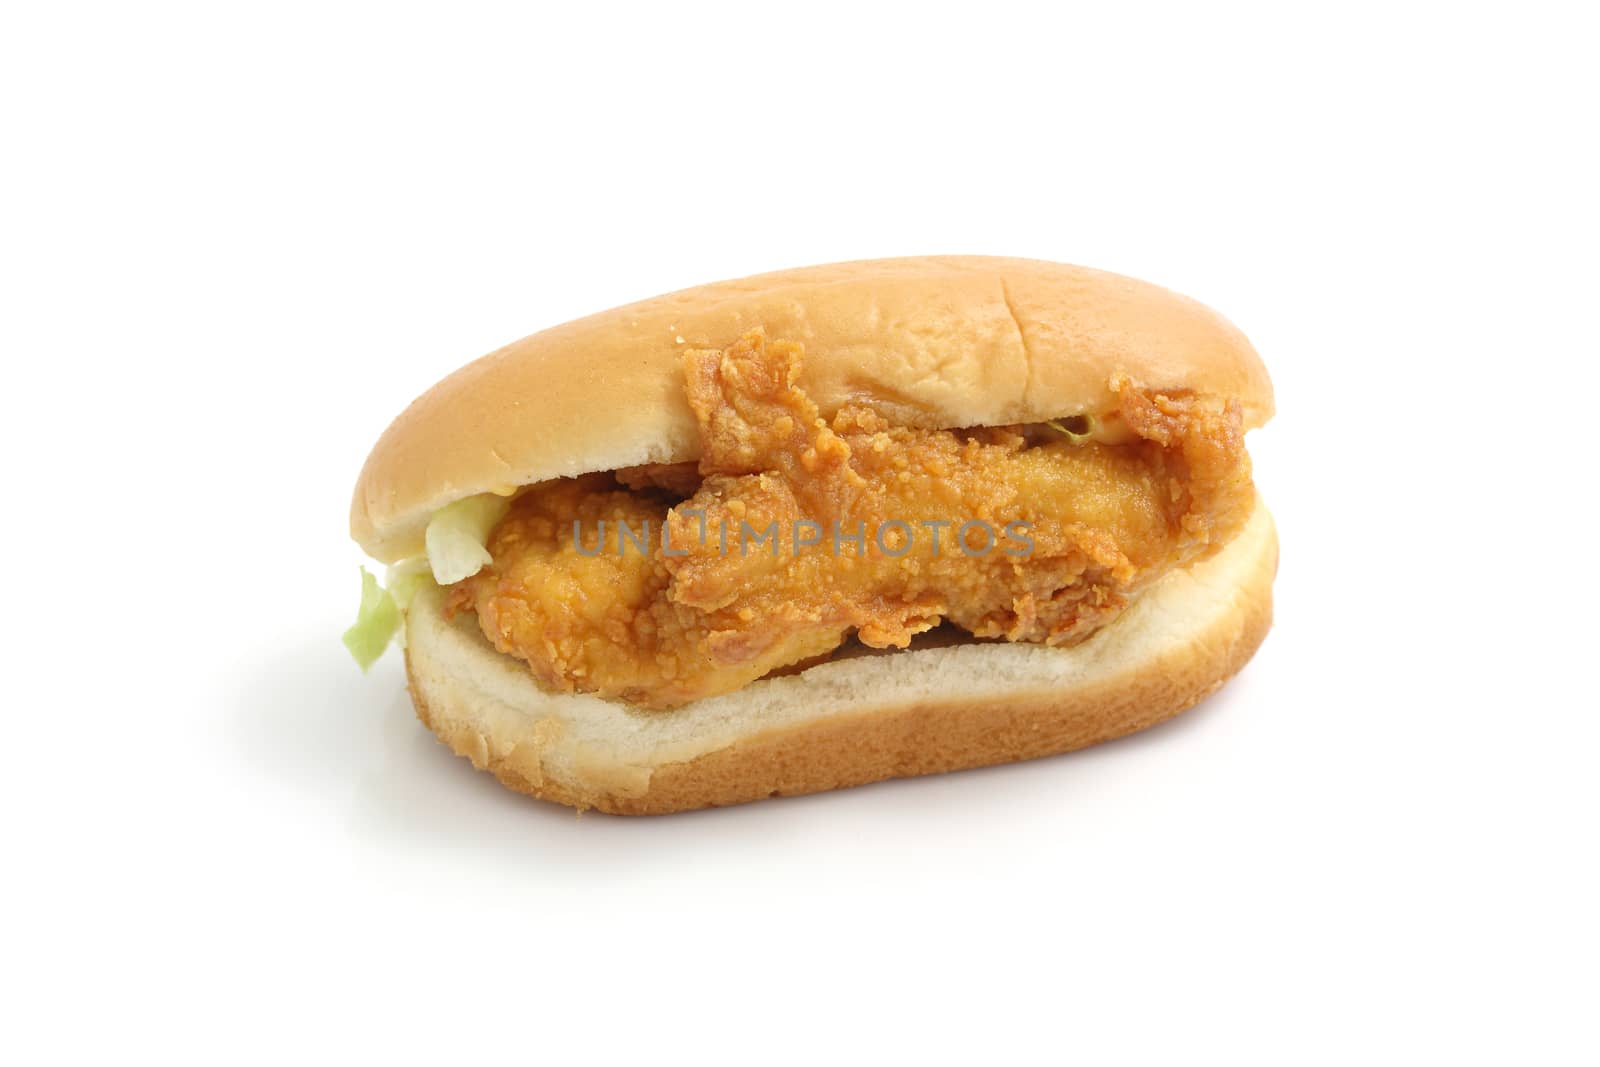 fry chicken sandwich isolated in white background by piyato